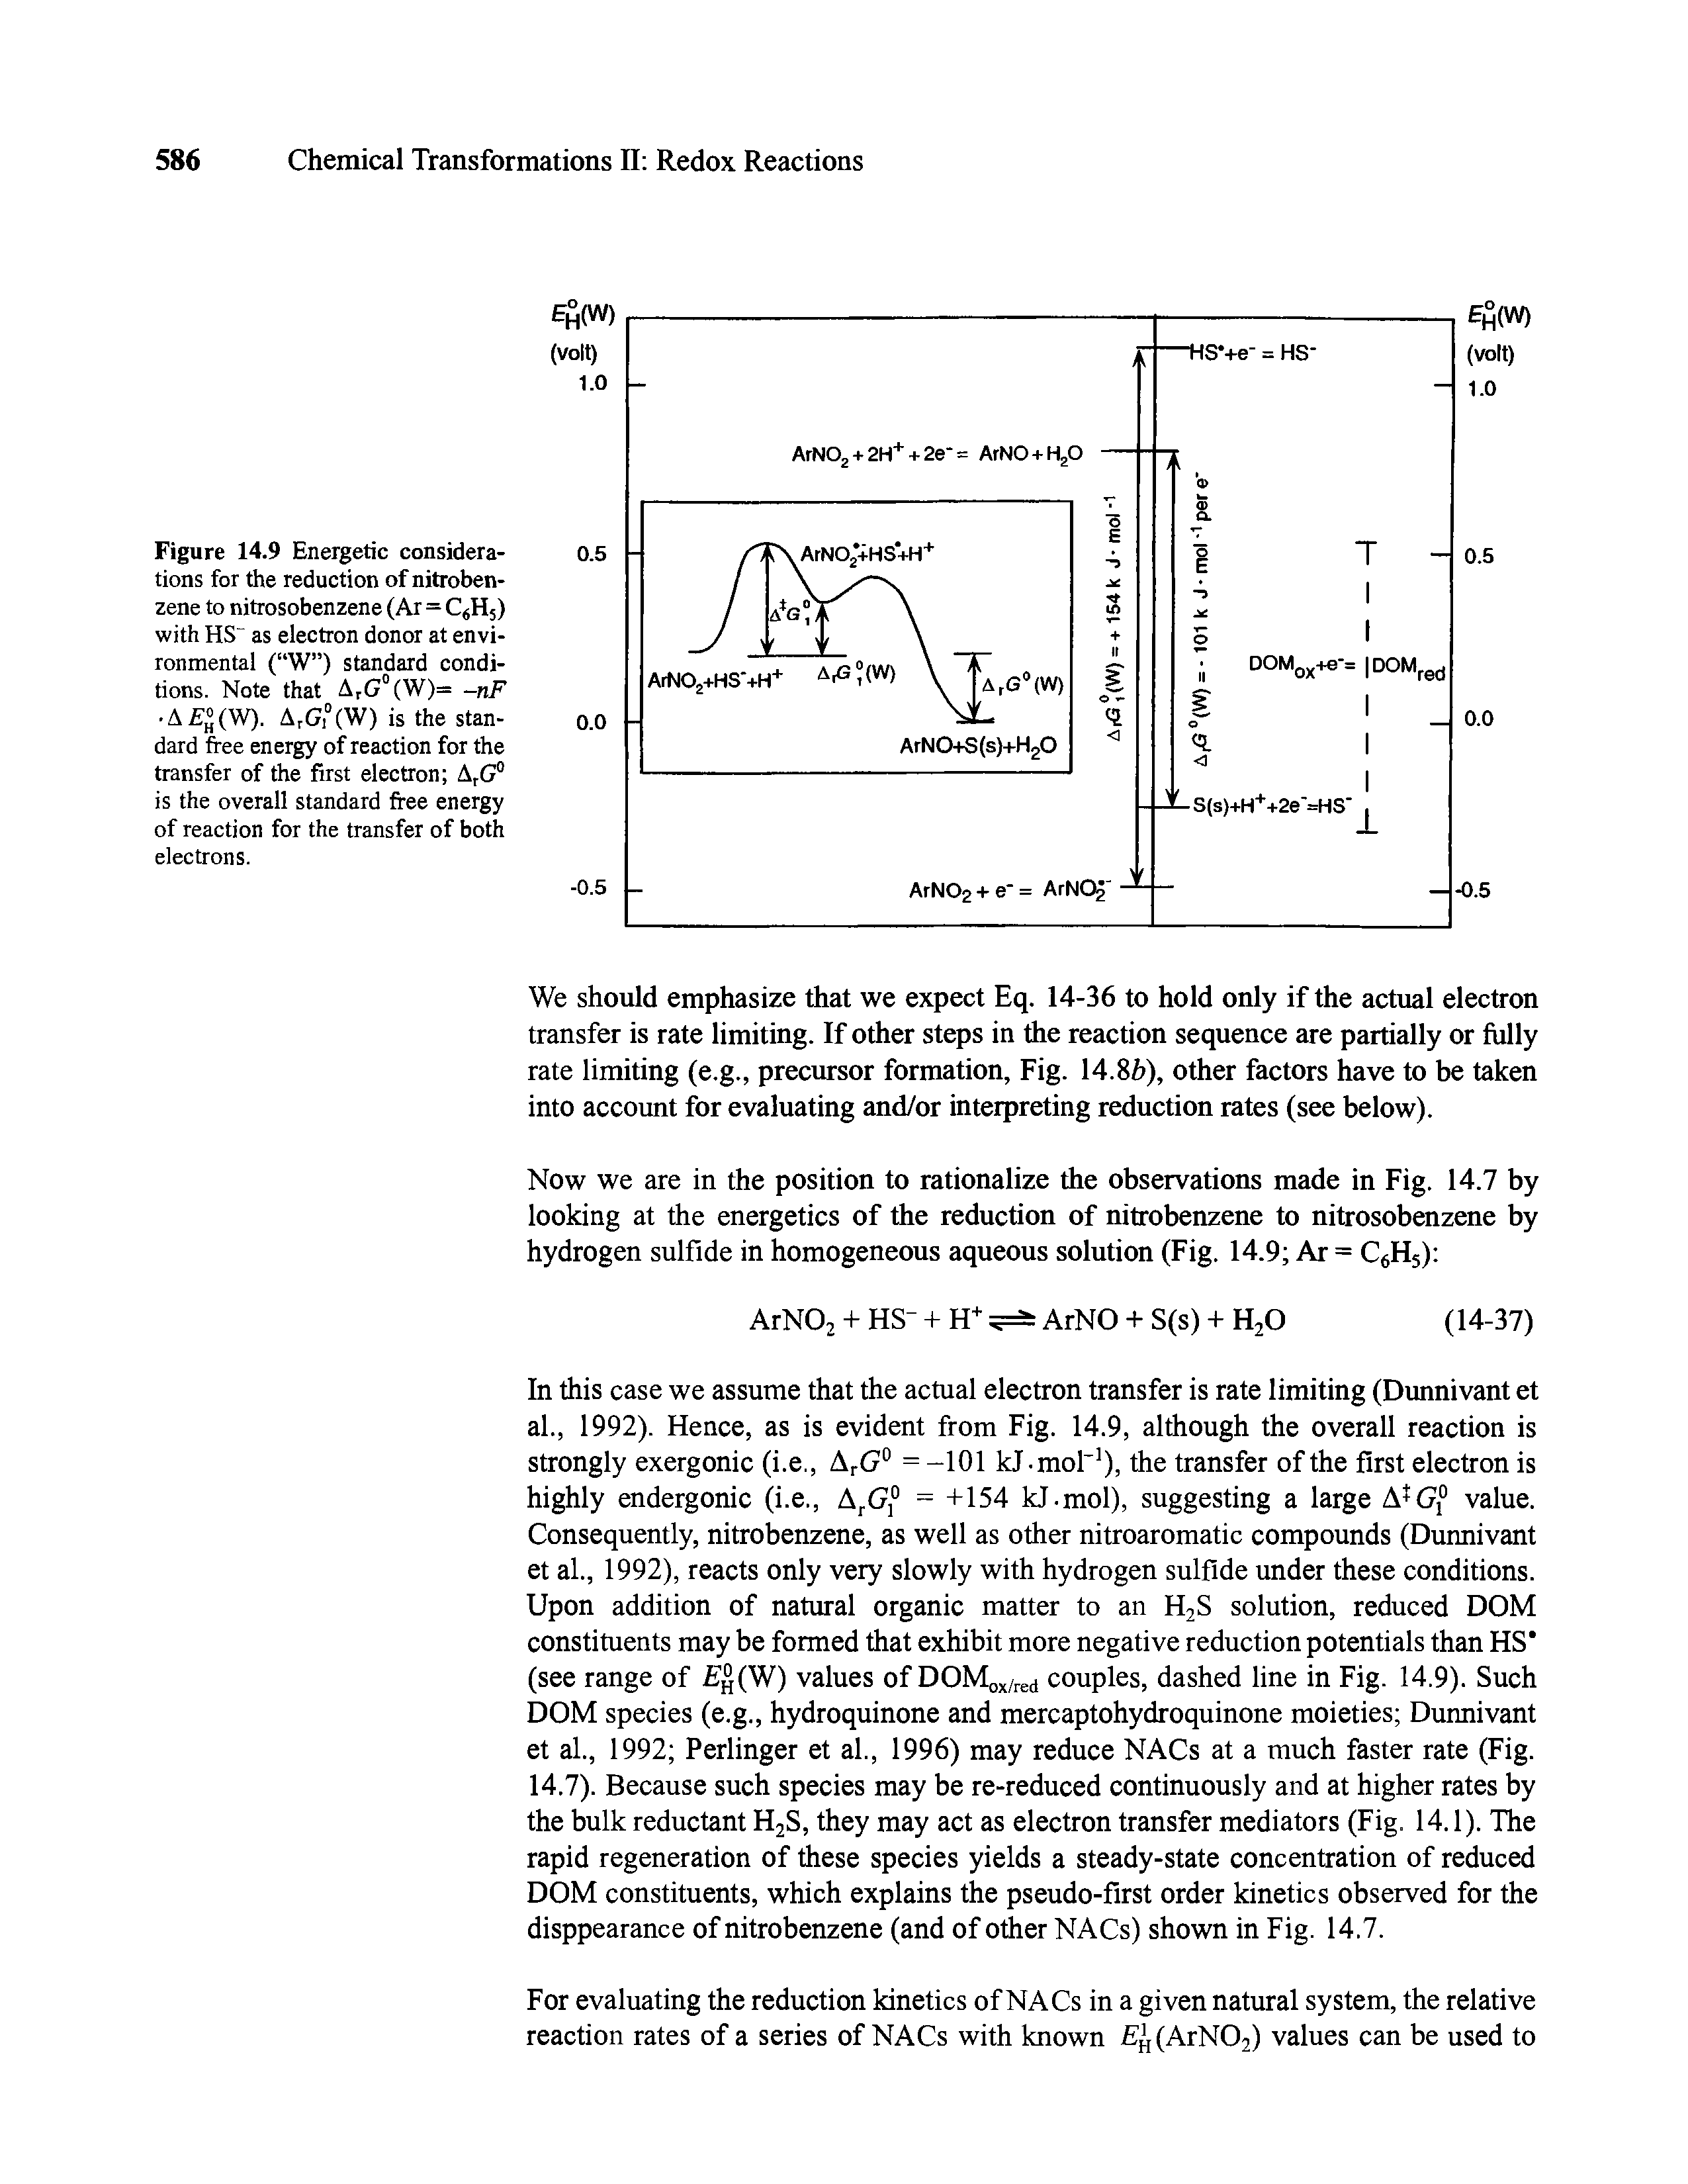 Figure 14.9 Energetic considerations for the reduction of nitrobenzene to nitrosobenzene (Ar = C6H5) with HS as electron donor at environmental ( W ) standard conditions. Note that ArG°(W)= -nF A (W). ArG,°(W) is the standard free energy of reaction for the transfer of the first electron ArG° is the overall standard free energy of reaction for the transfer of both electrons.